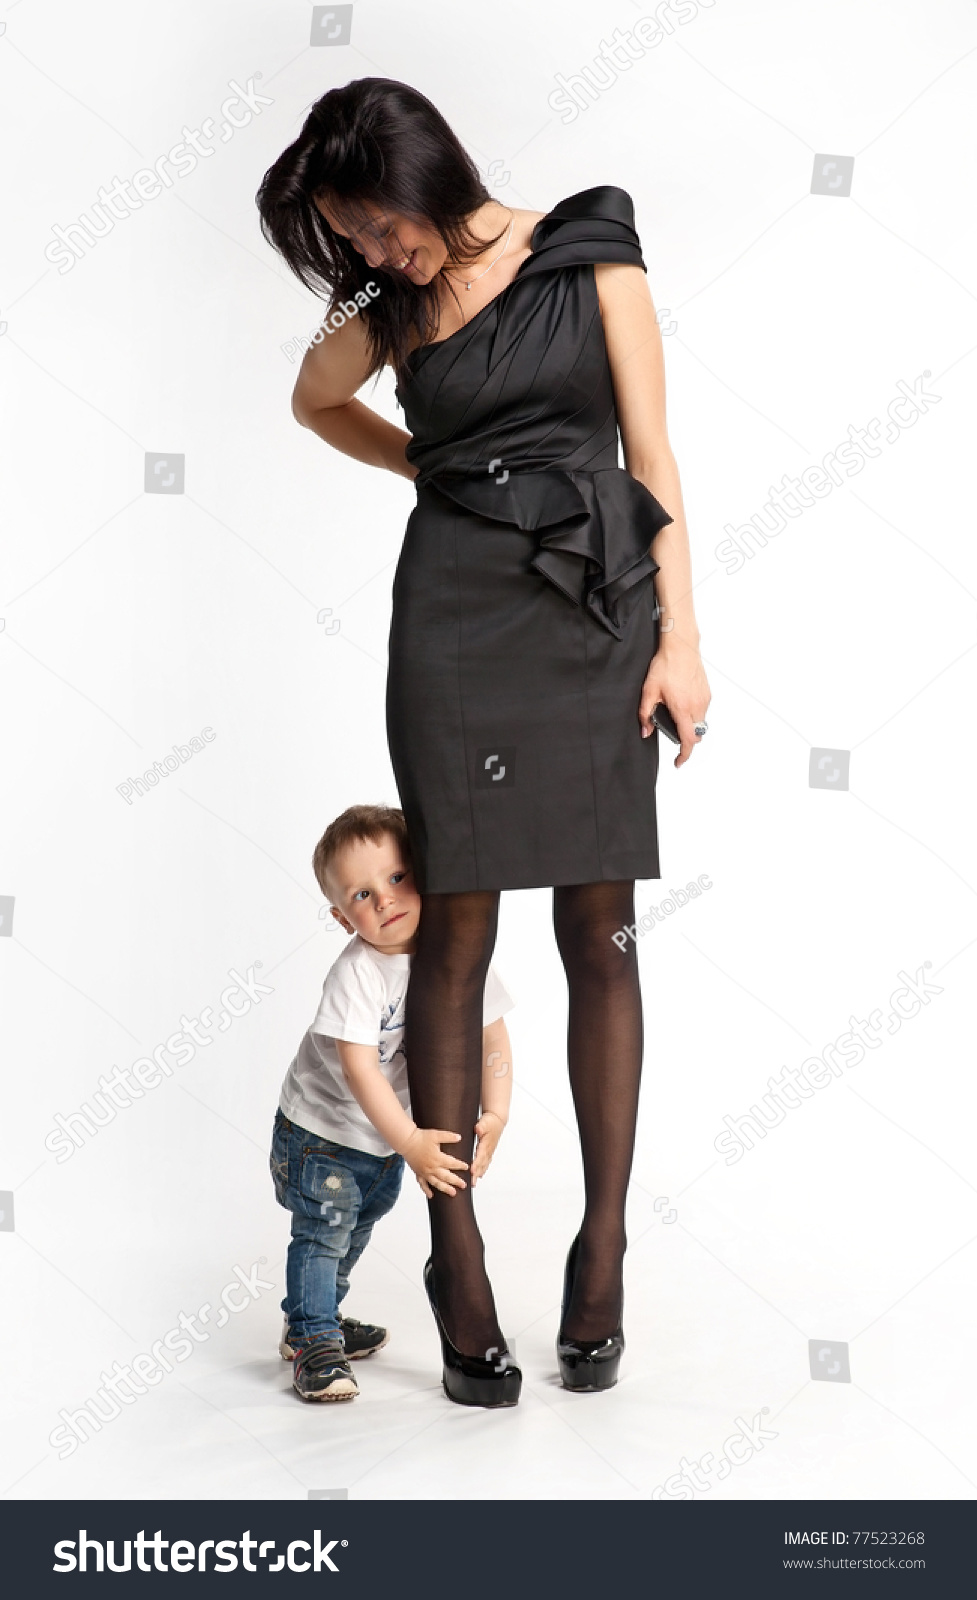 stock-photo-little-boy-clinging-to-mother-s-leg-unwilling-let-her-go-77523268.jpg